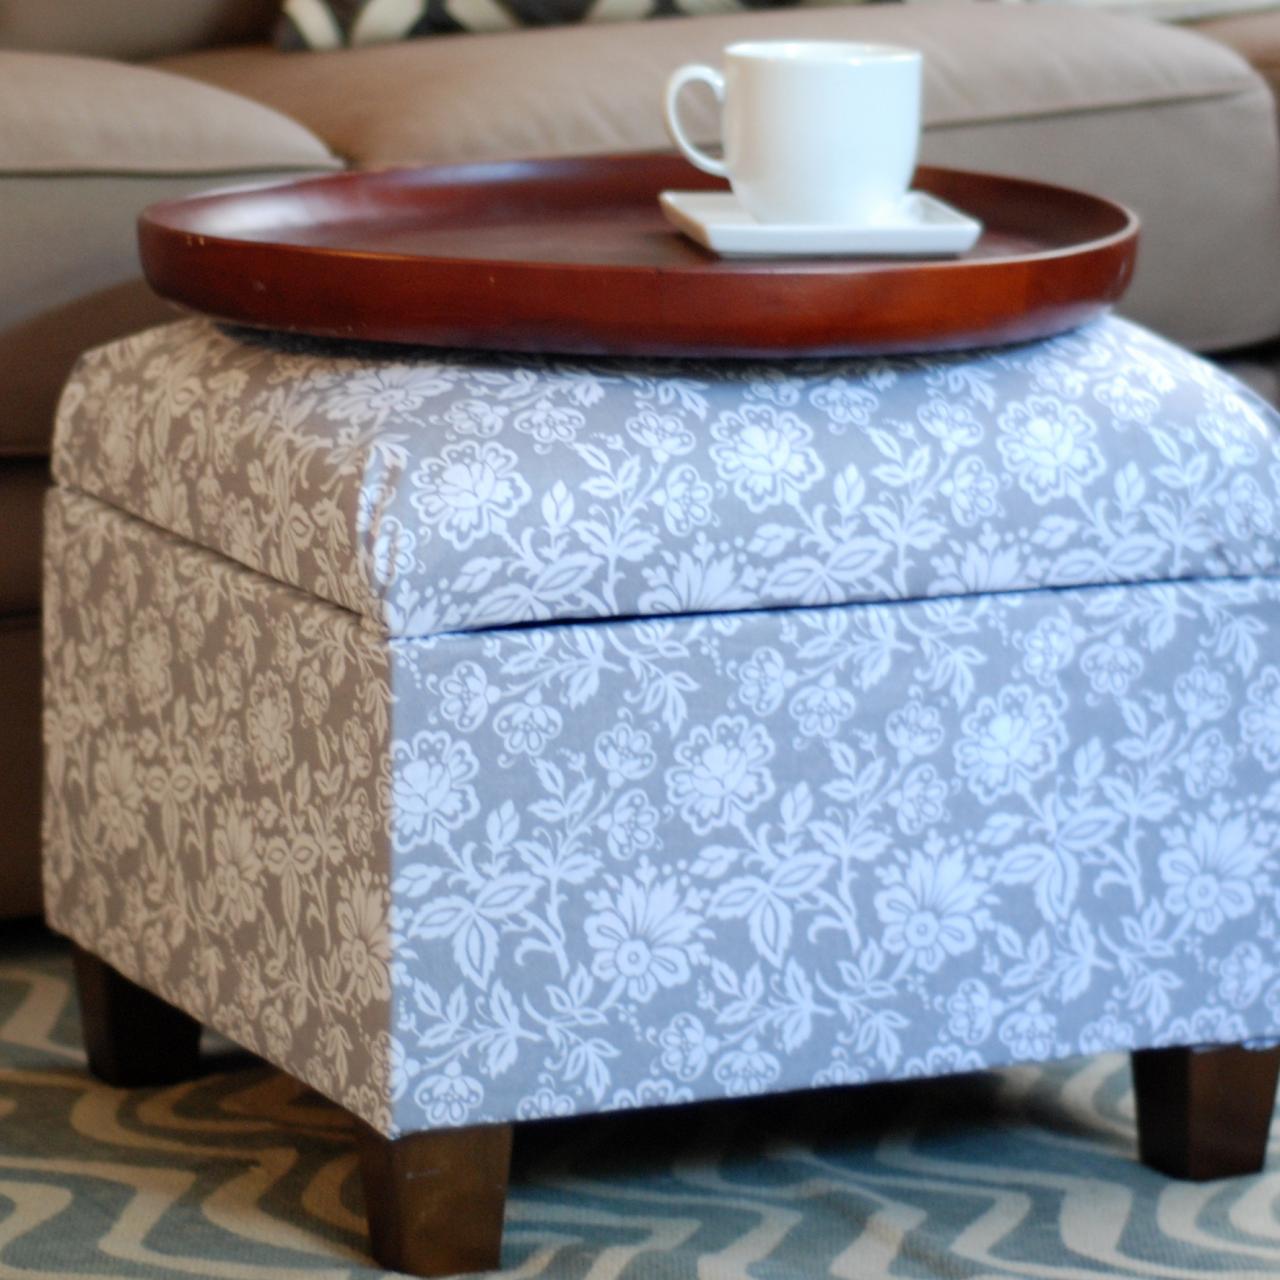 How to reupholster a simple footstool